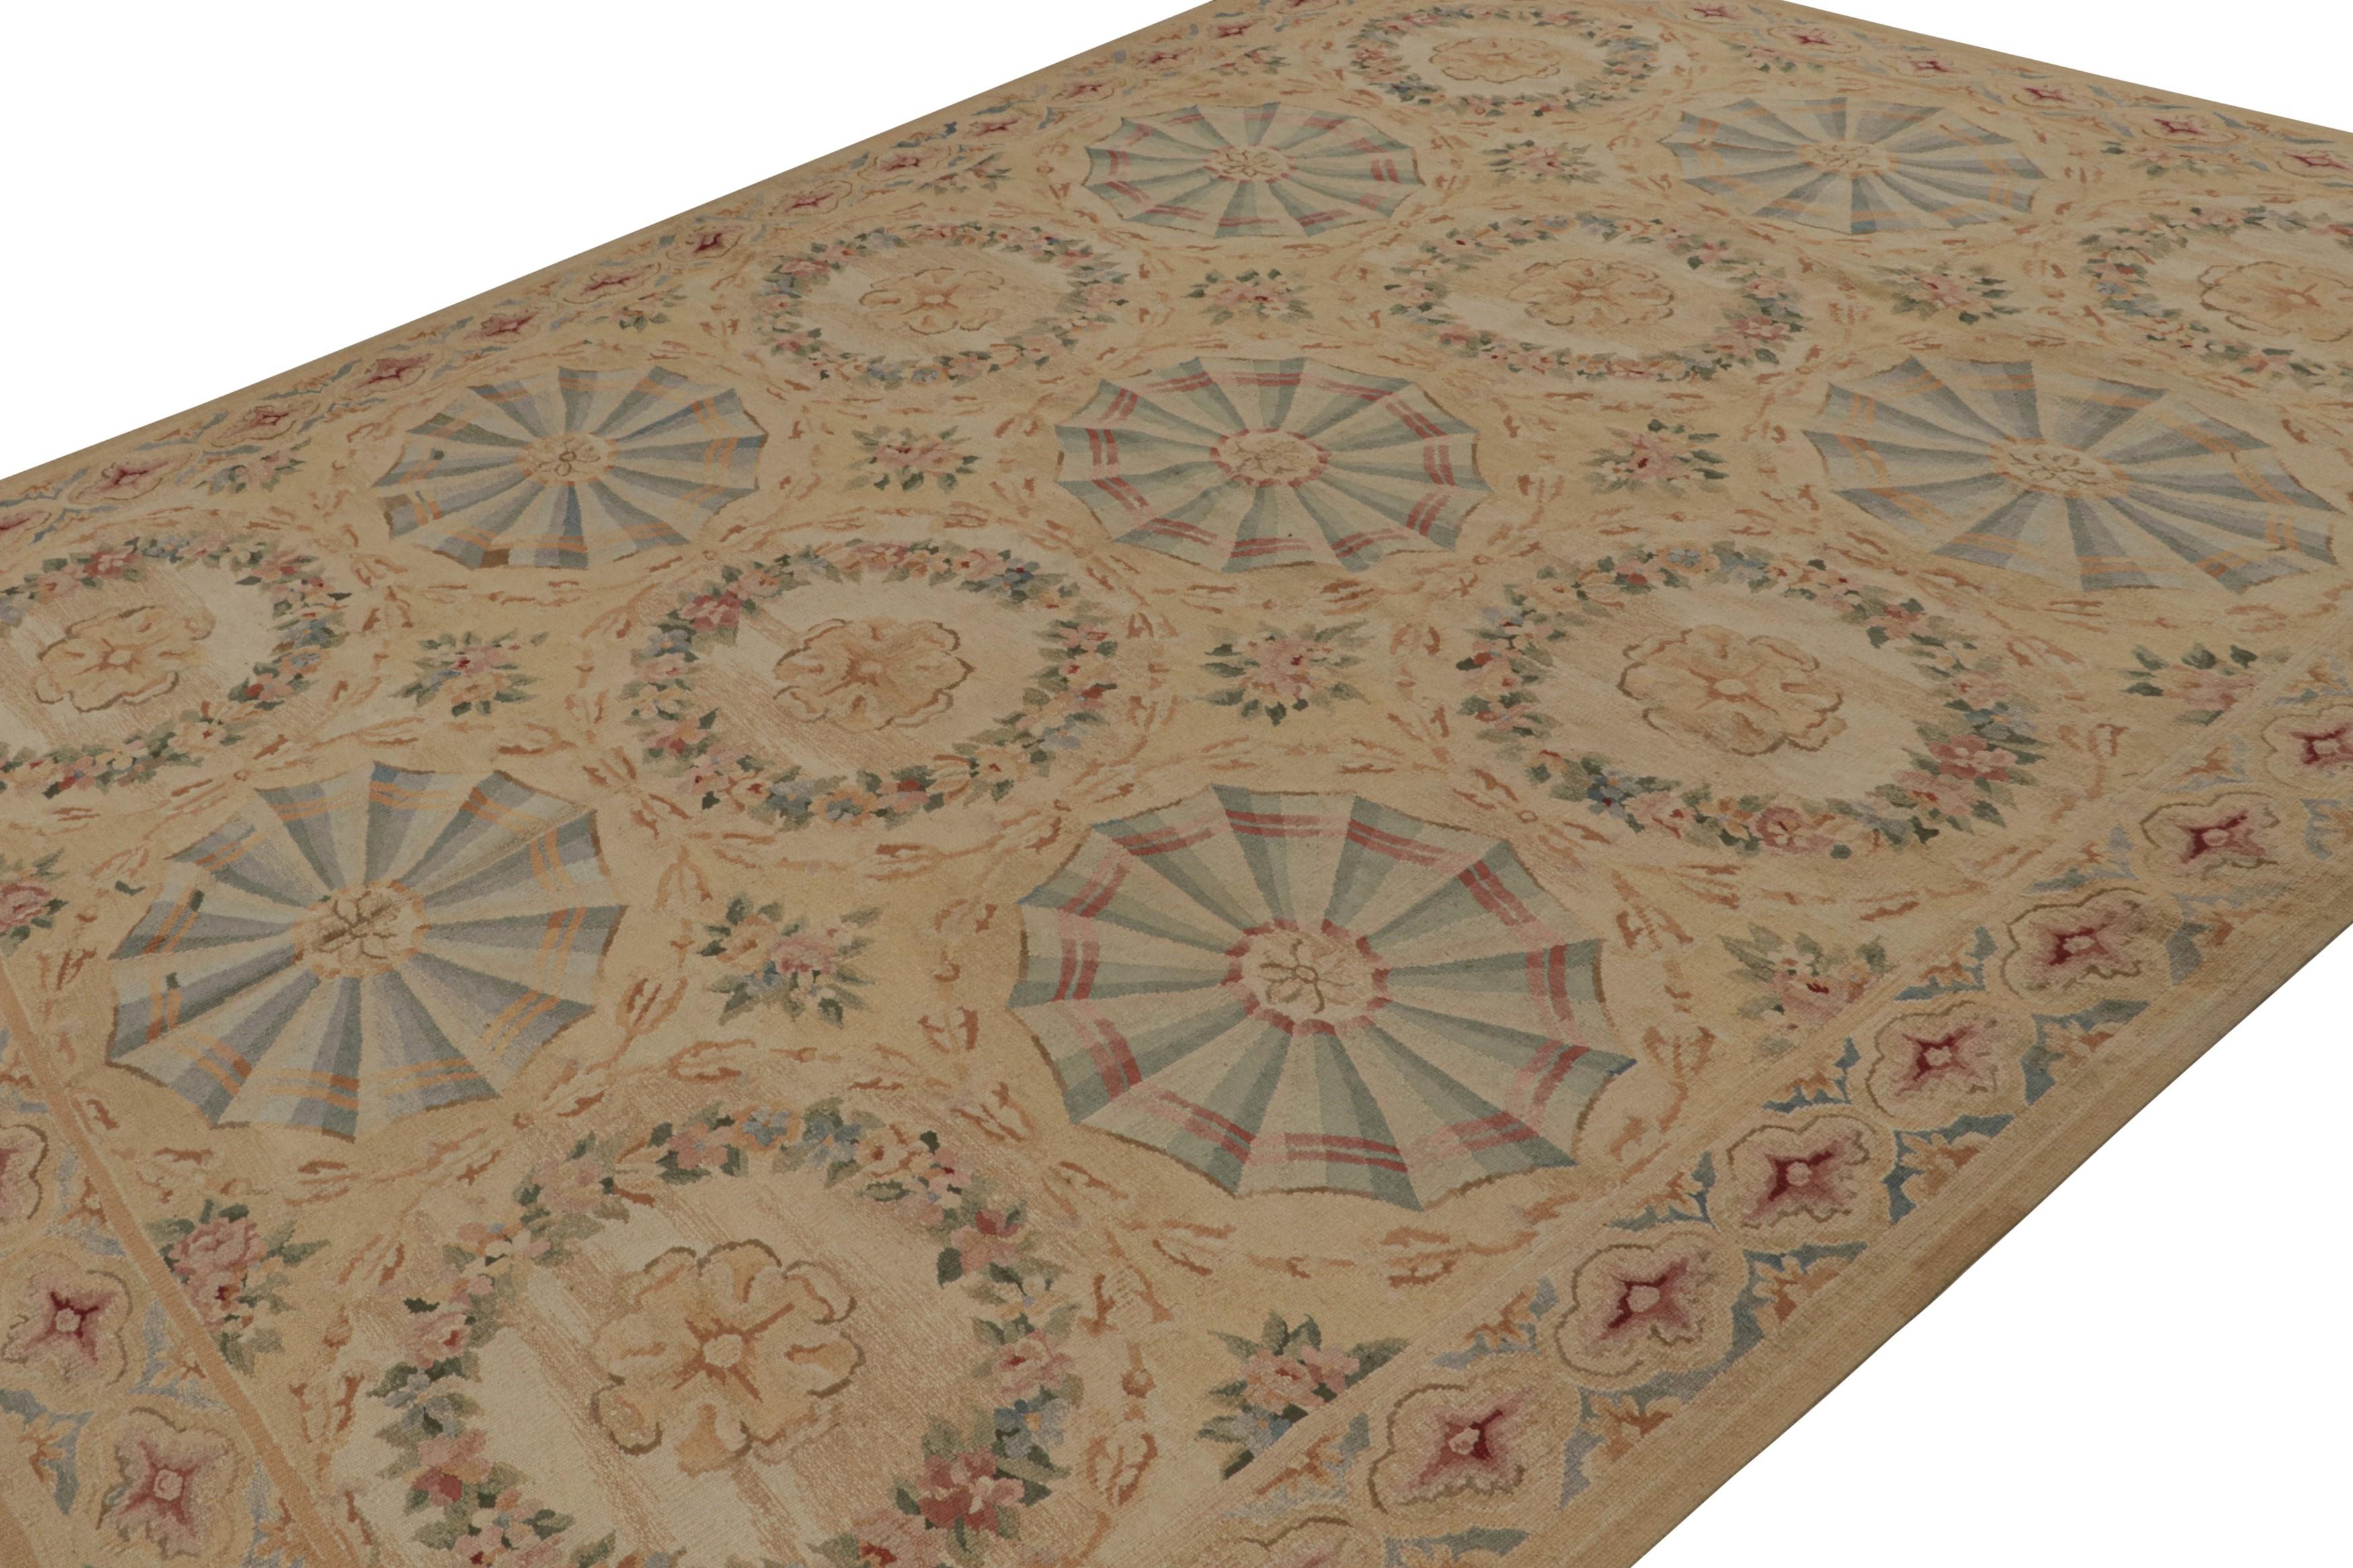 Handwoven in wool, this 9x12 Aubusson flatweave rug in brown features colorful floral patterns and medallions, some in the cartouche style and others in wreaths, in present light blue, pink and green tones. 

On the Design: 

This design has been